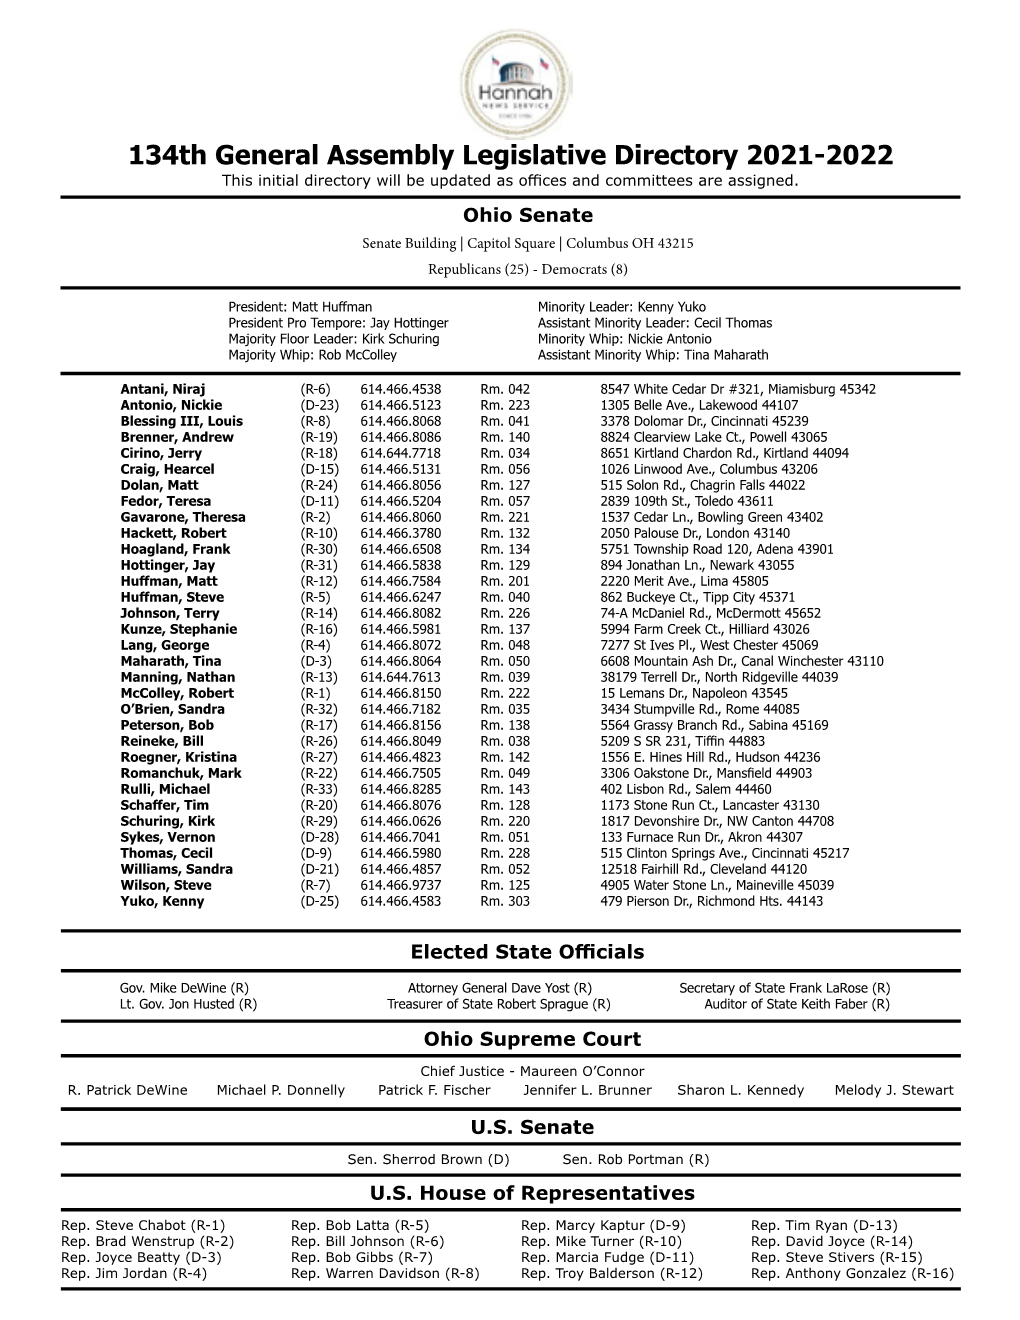 134Th General Assembly Legislative Directory 2021-2022 This Initial Directory Will Be Updated As Offices and Committees Are Assigned